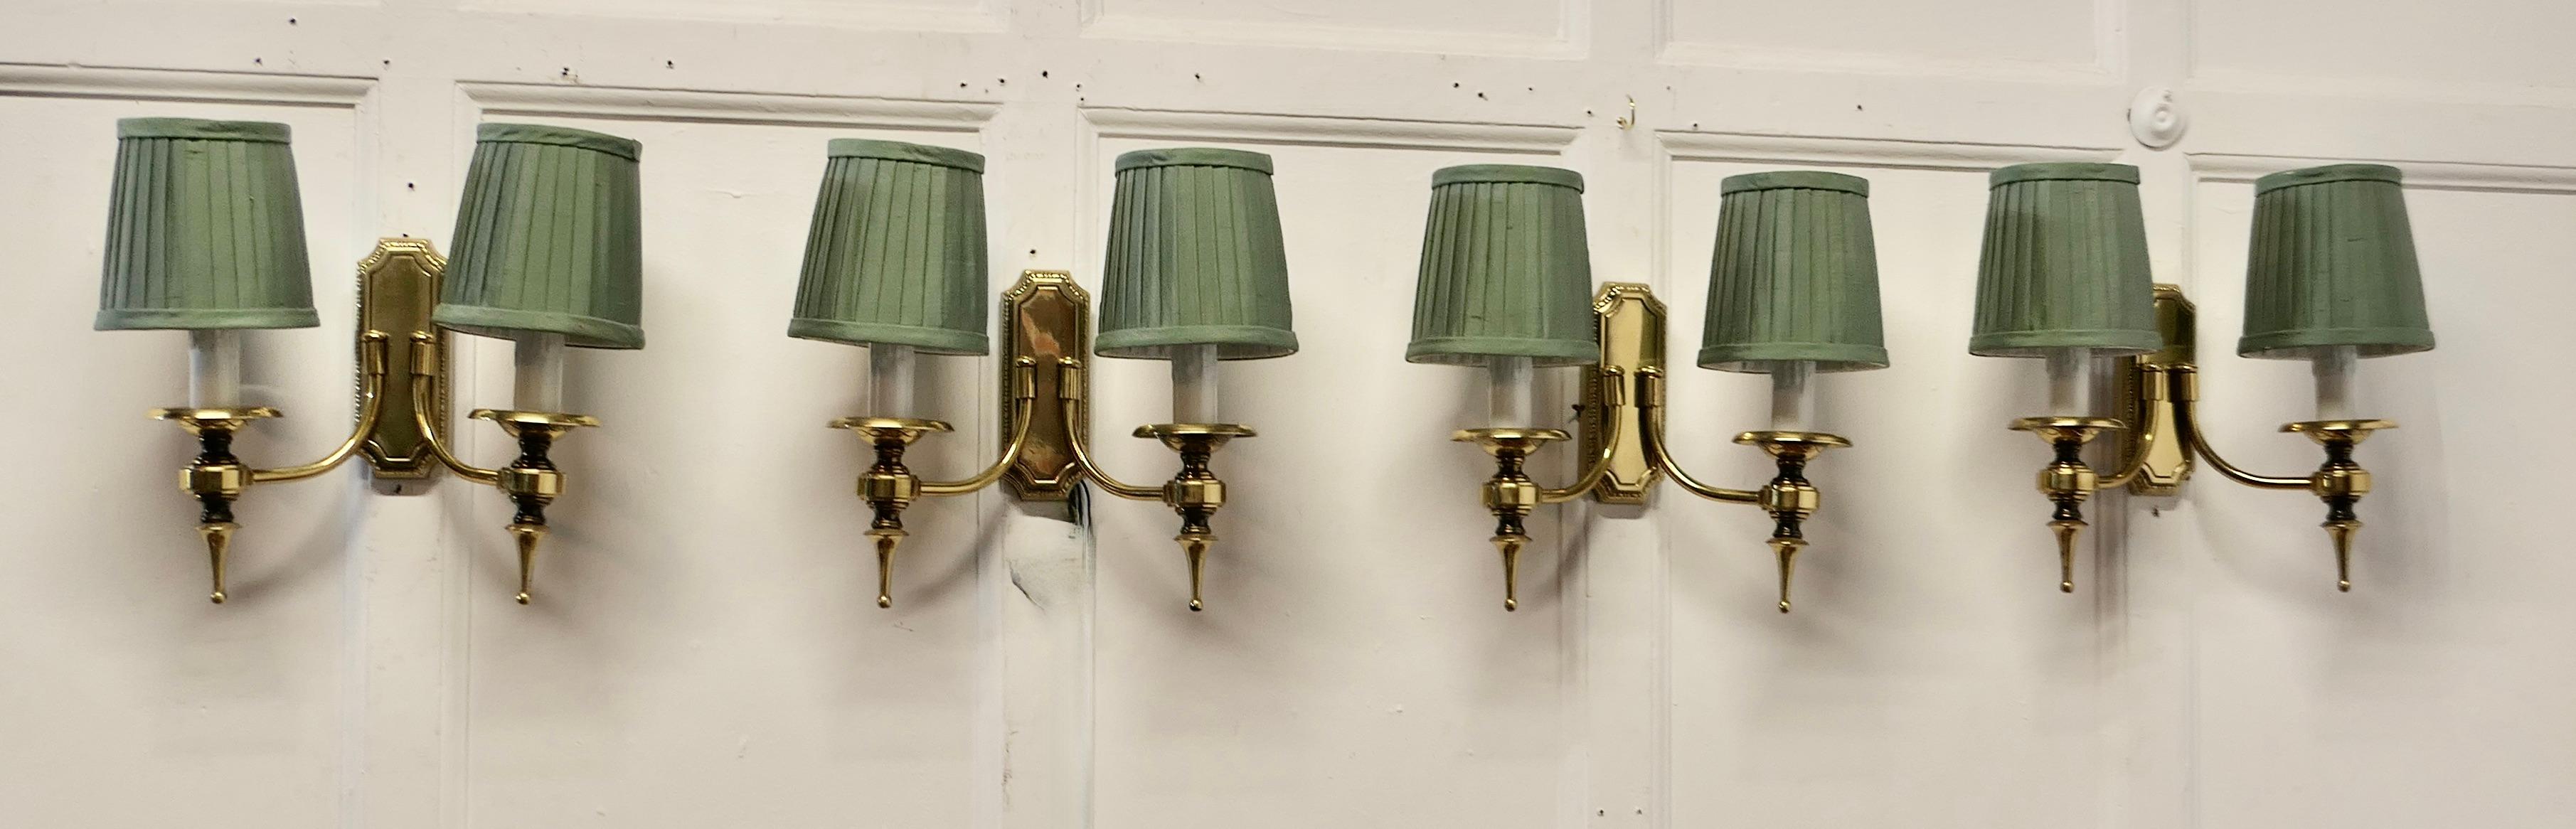 A Set of 4 Twin Wall Lights  A very handsome set of 4 double wall lights  3